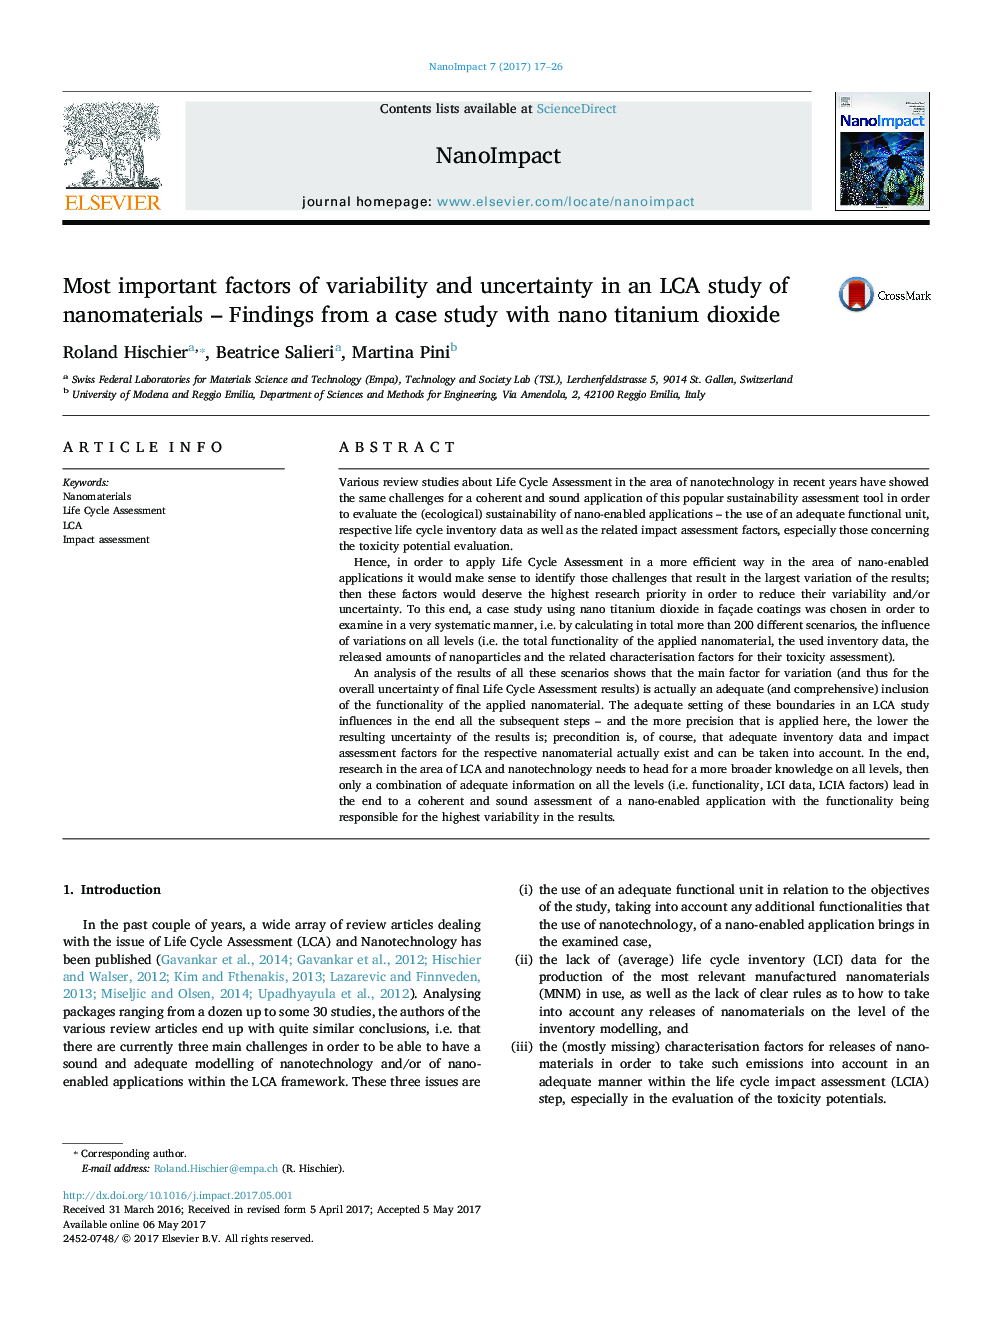 Most important factors of variability and uncertainty in an LCA study of nanomaterials - Findings from a case study with nano titanium dioxide